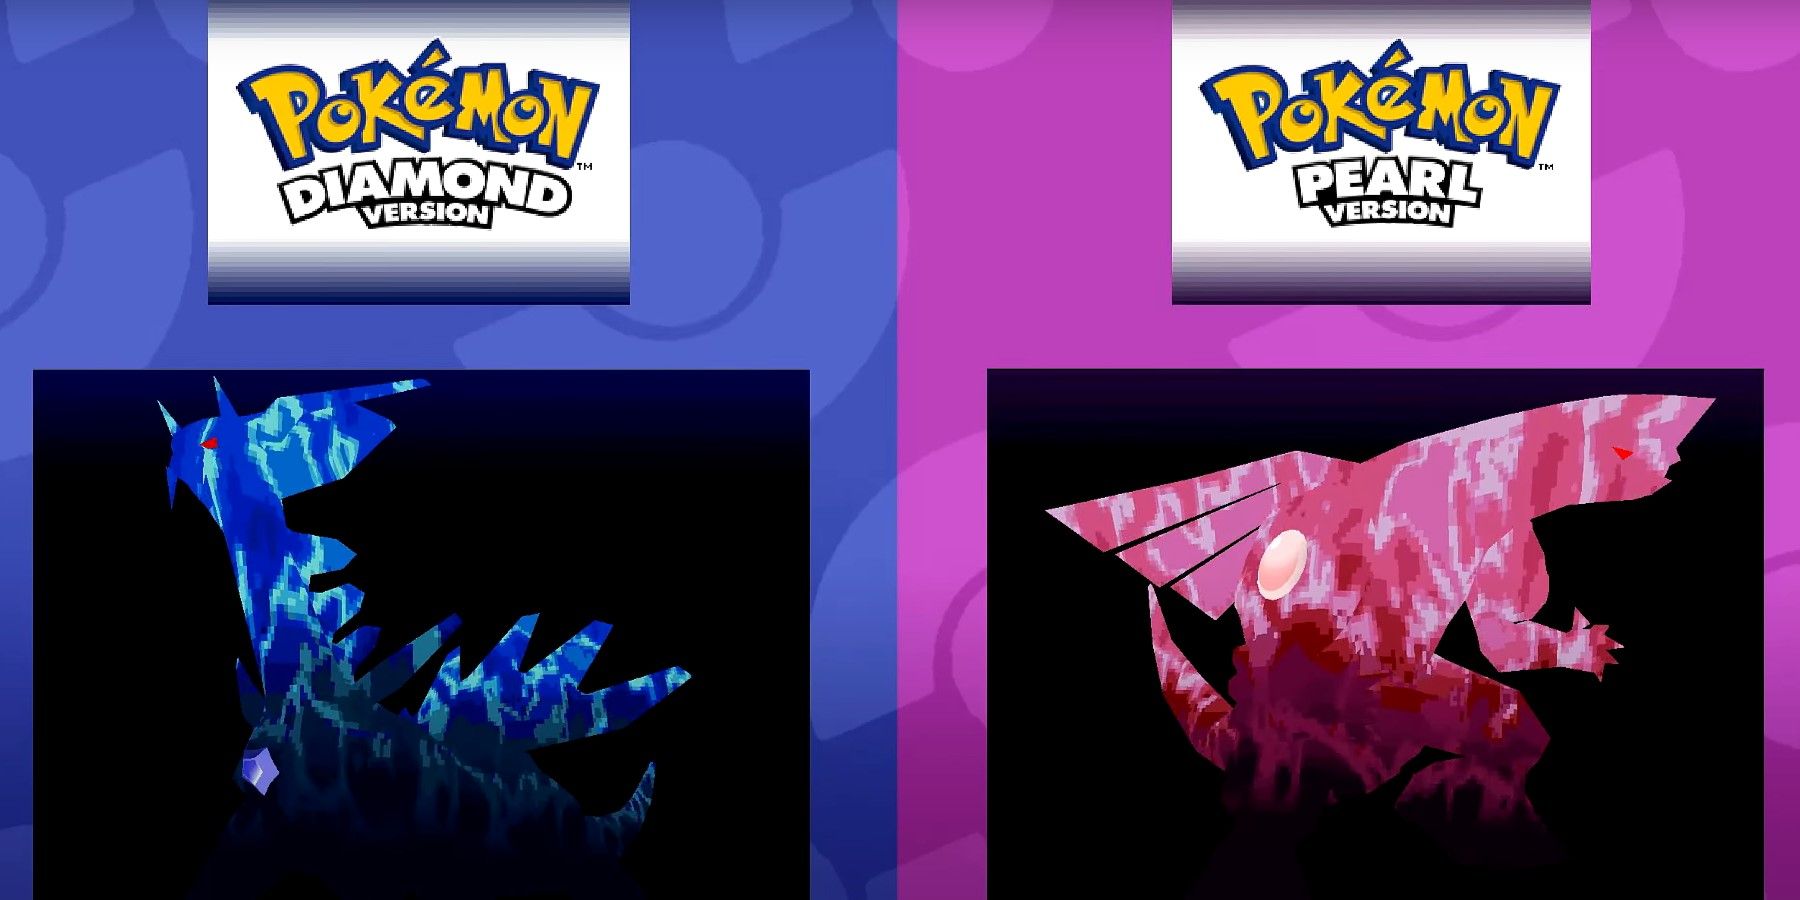 The Pokémon character is showing the title screens for Diamond and Pearl.